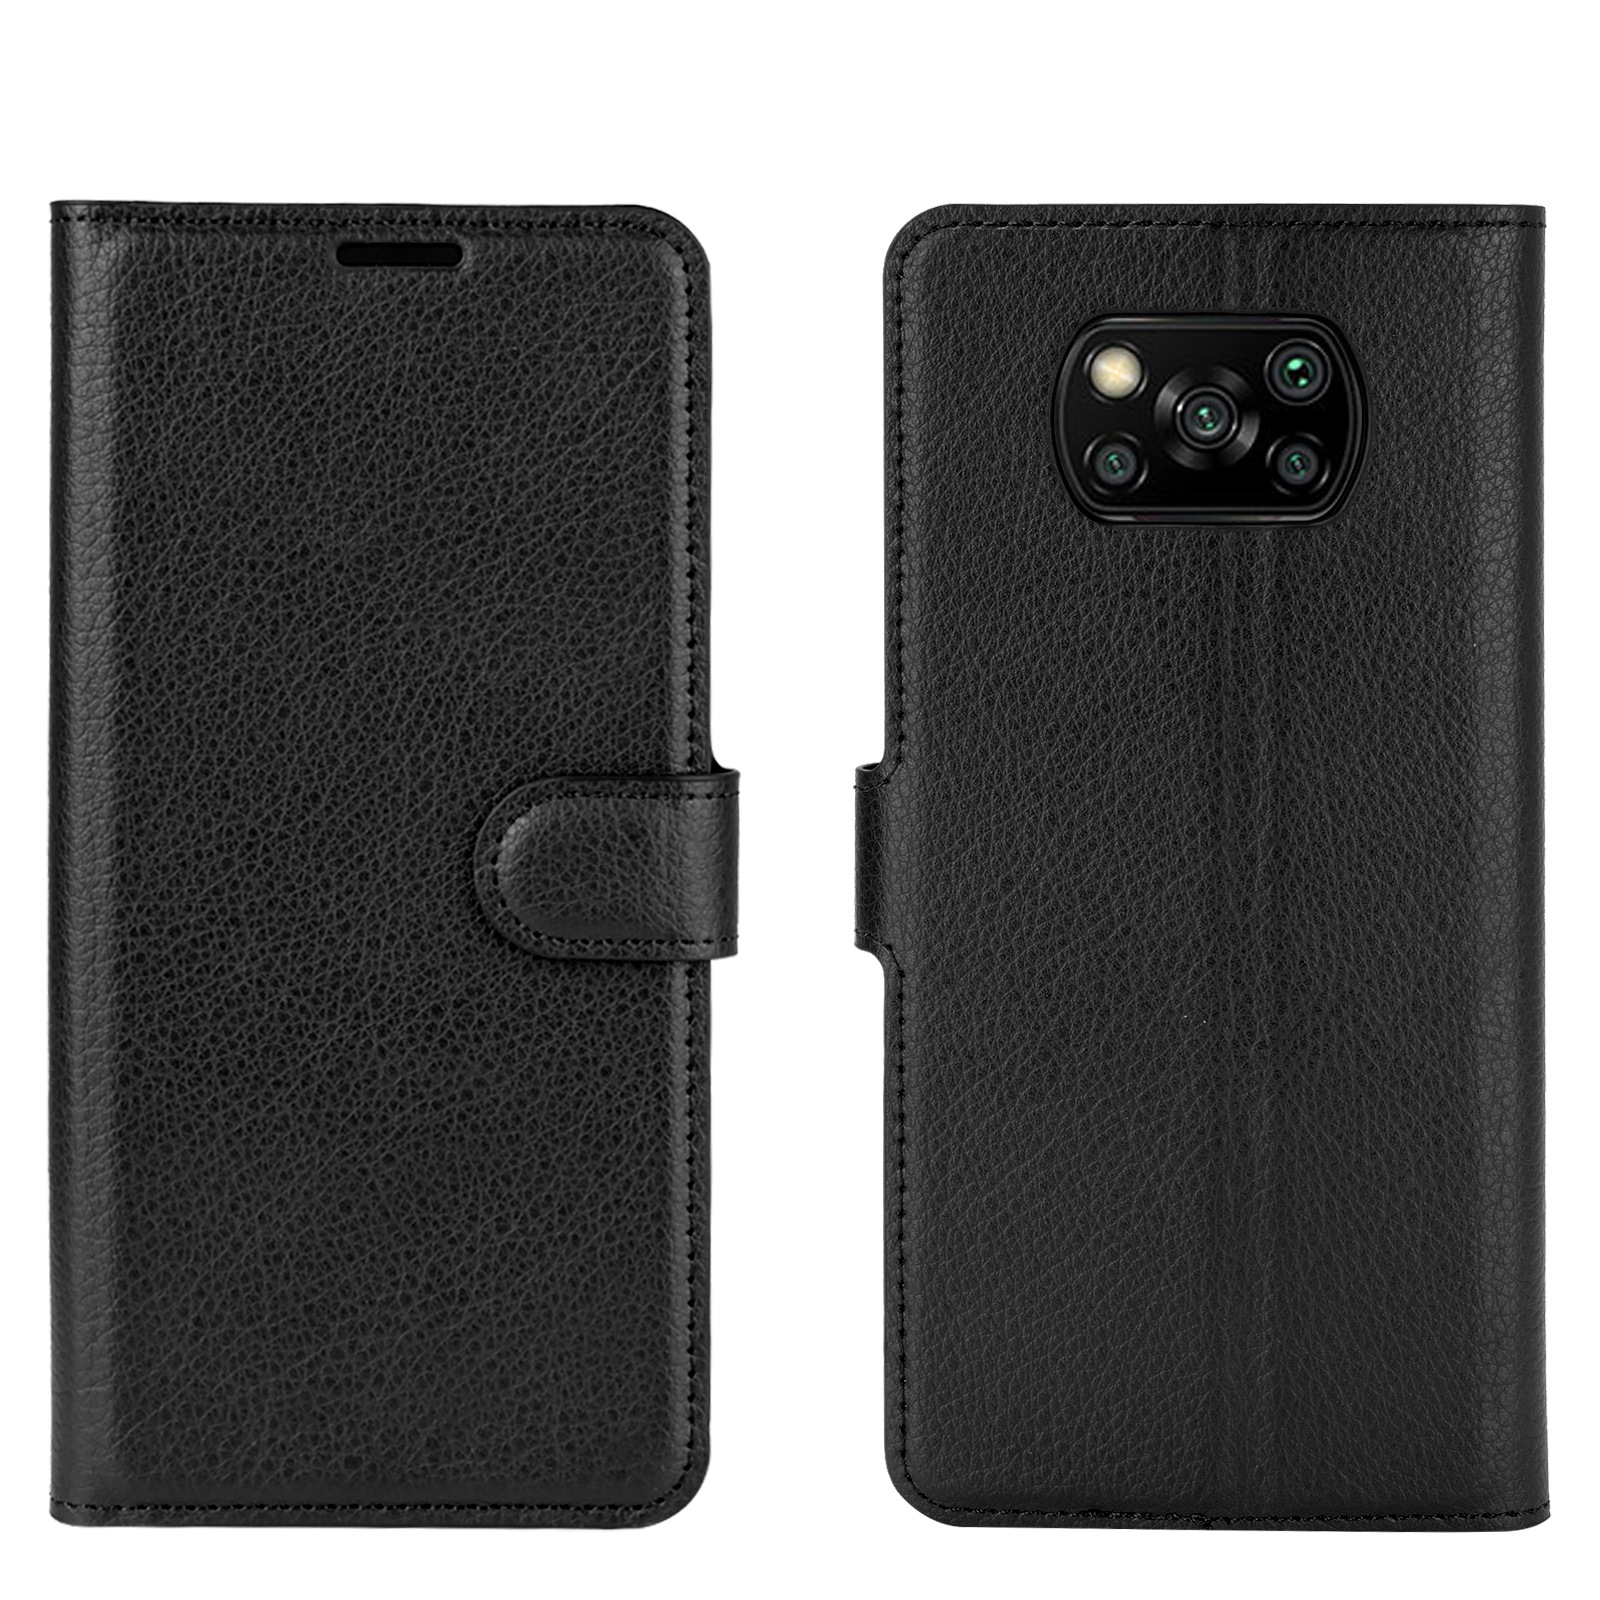 Bakeey-for-POCO-X3-PRO--POCO-X3-NFC-Case-Litchi-Pattern-Flip-Shockproof-PU-Leather-Full-Body-Protect-1847324-5